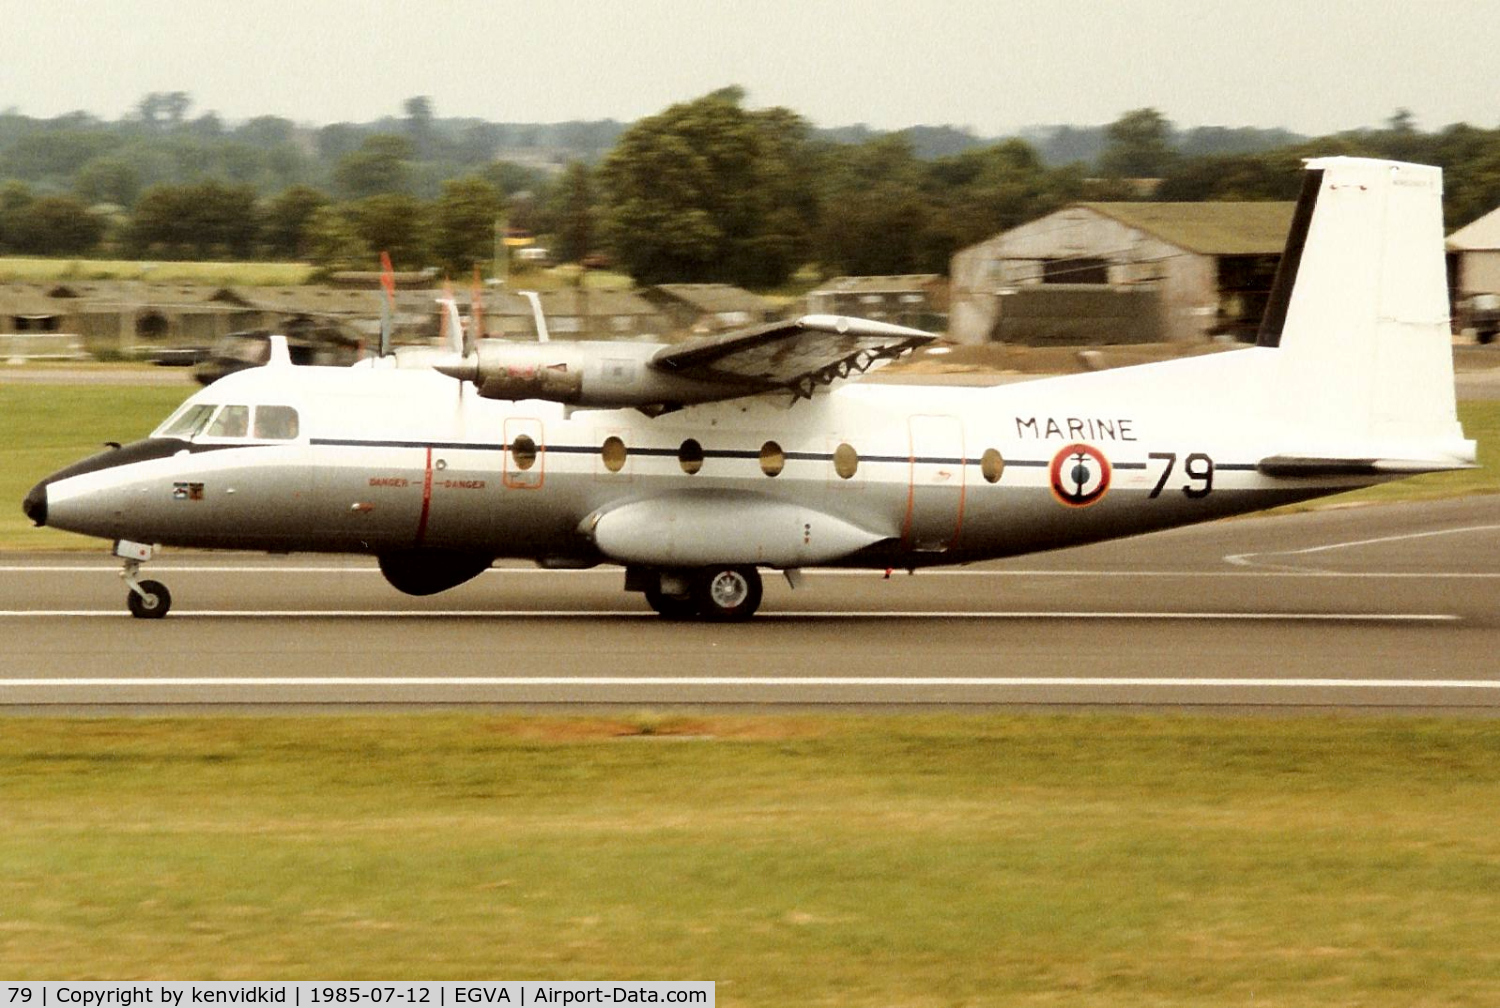 79, 1971 Nord N-262A-29 C/N 79, French Navy arriving at IAT.